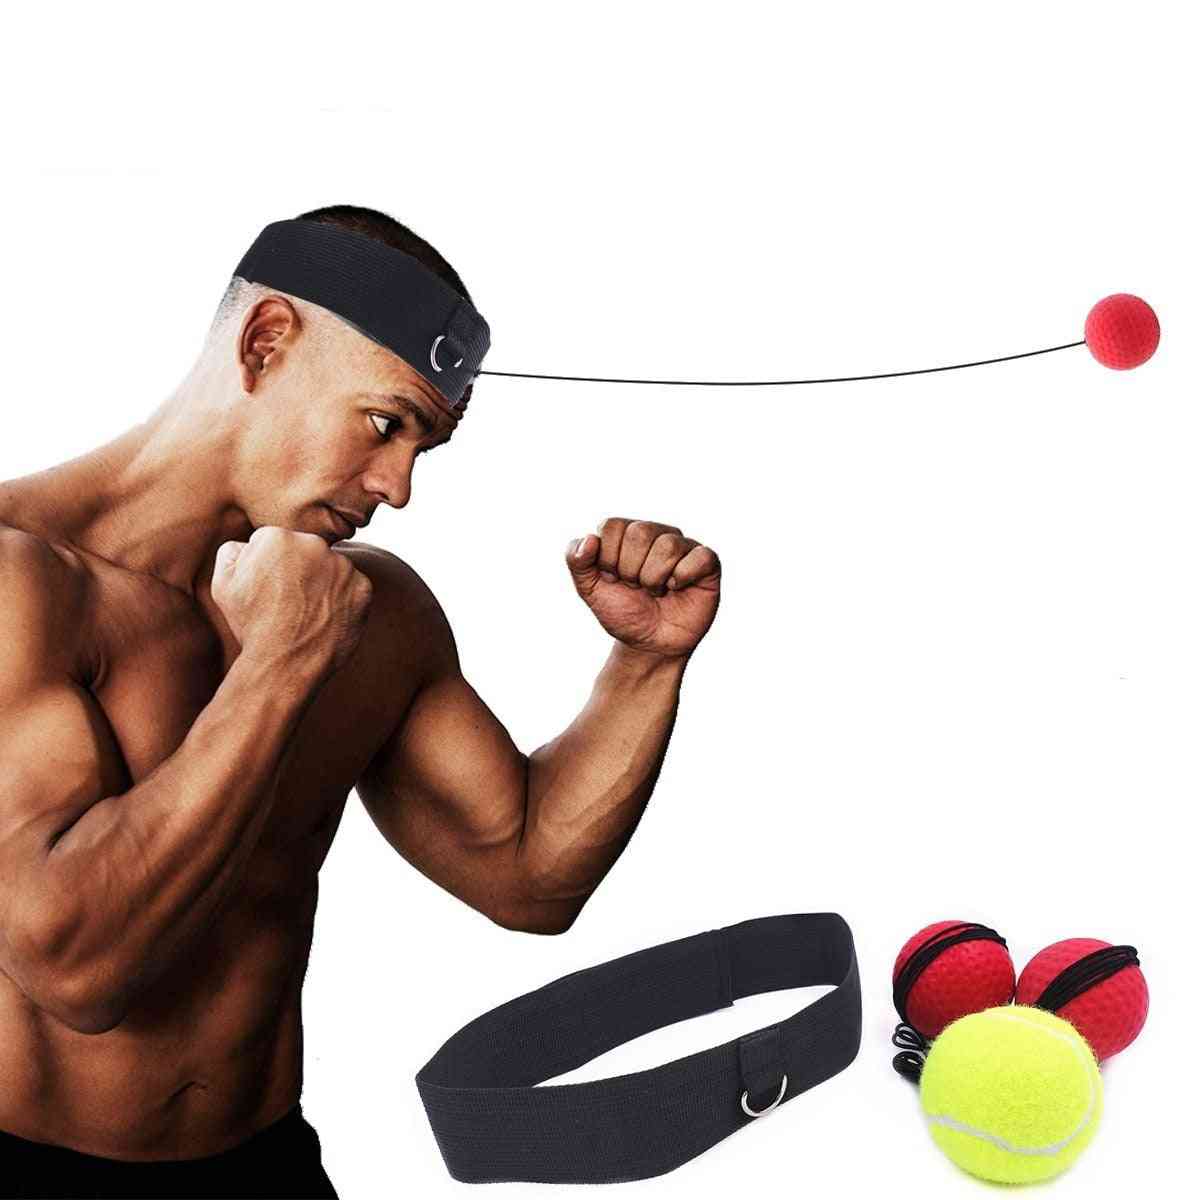 Punching Speed Reaction Agility Training Difficulty Level Boxing Balls With Adjustable Headband